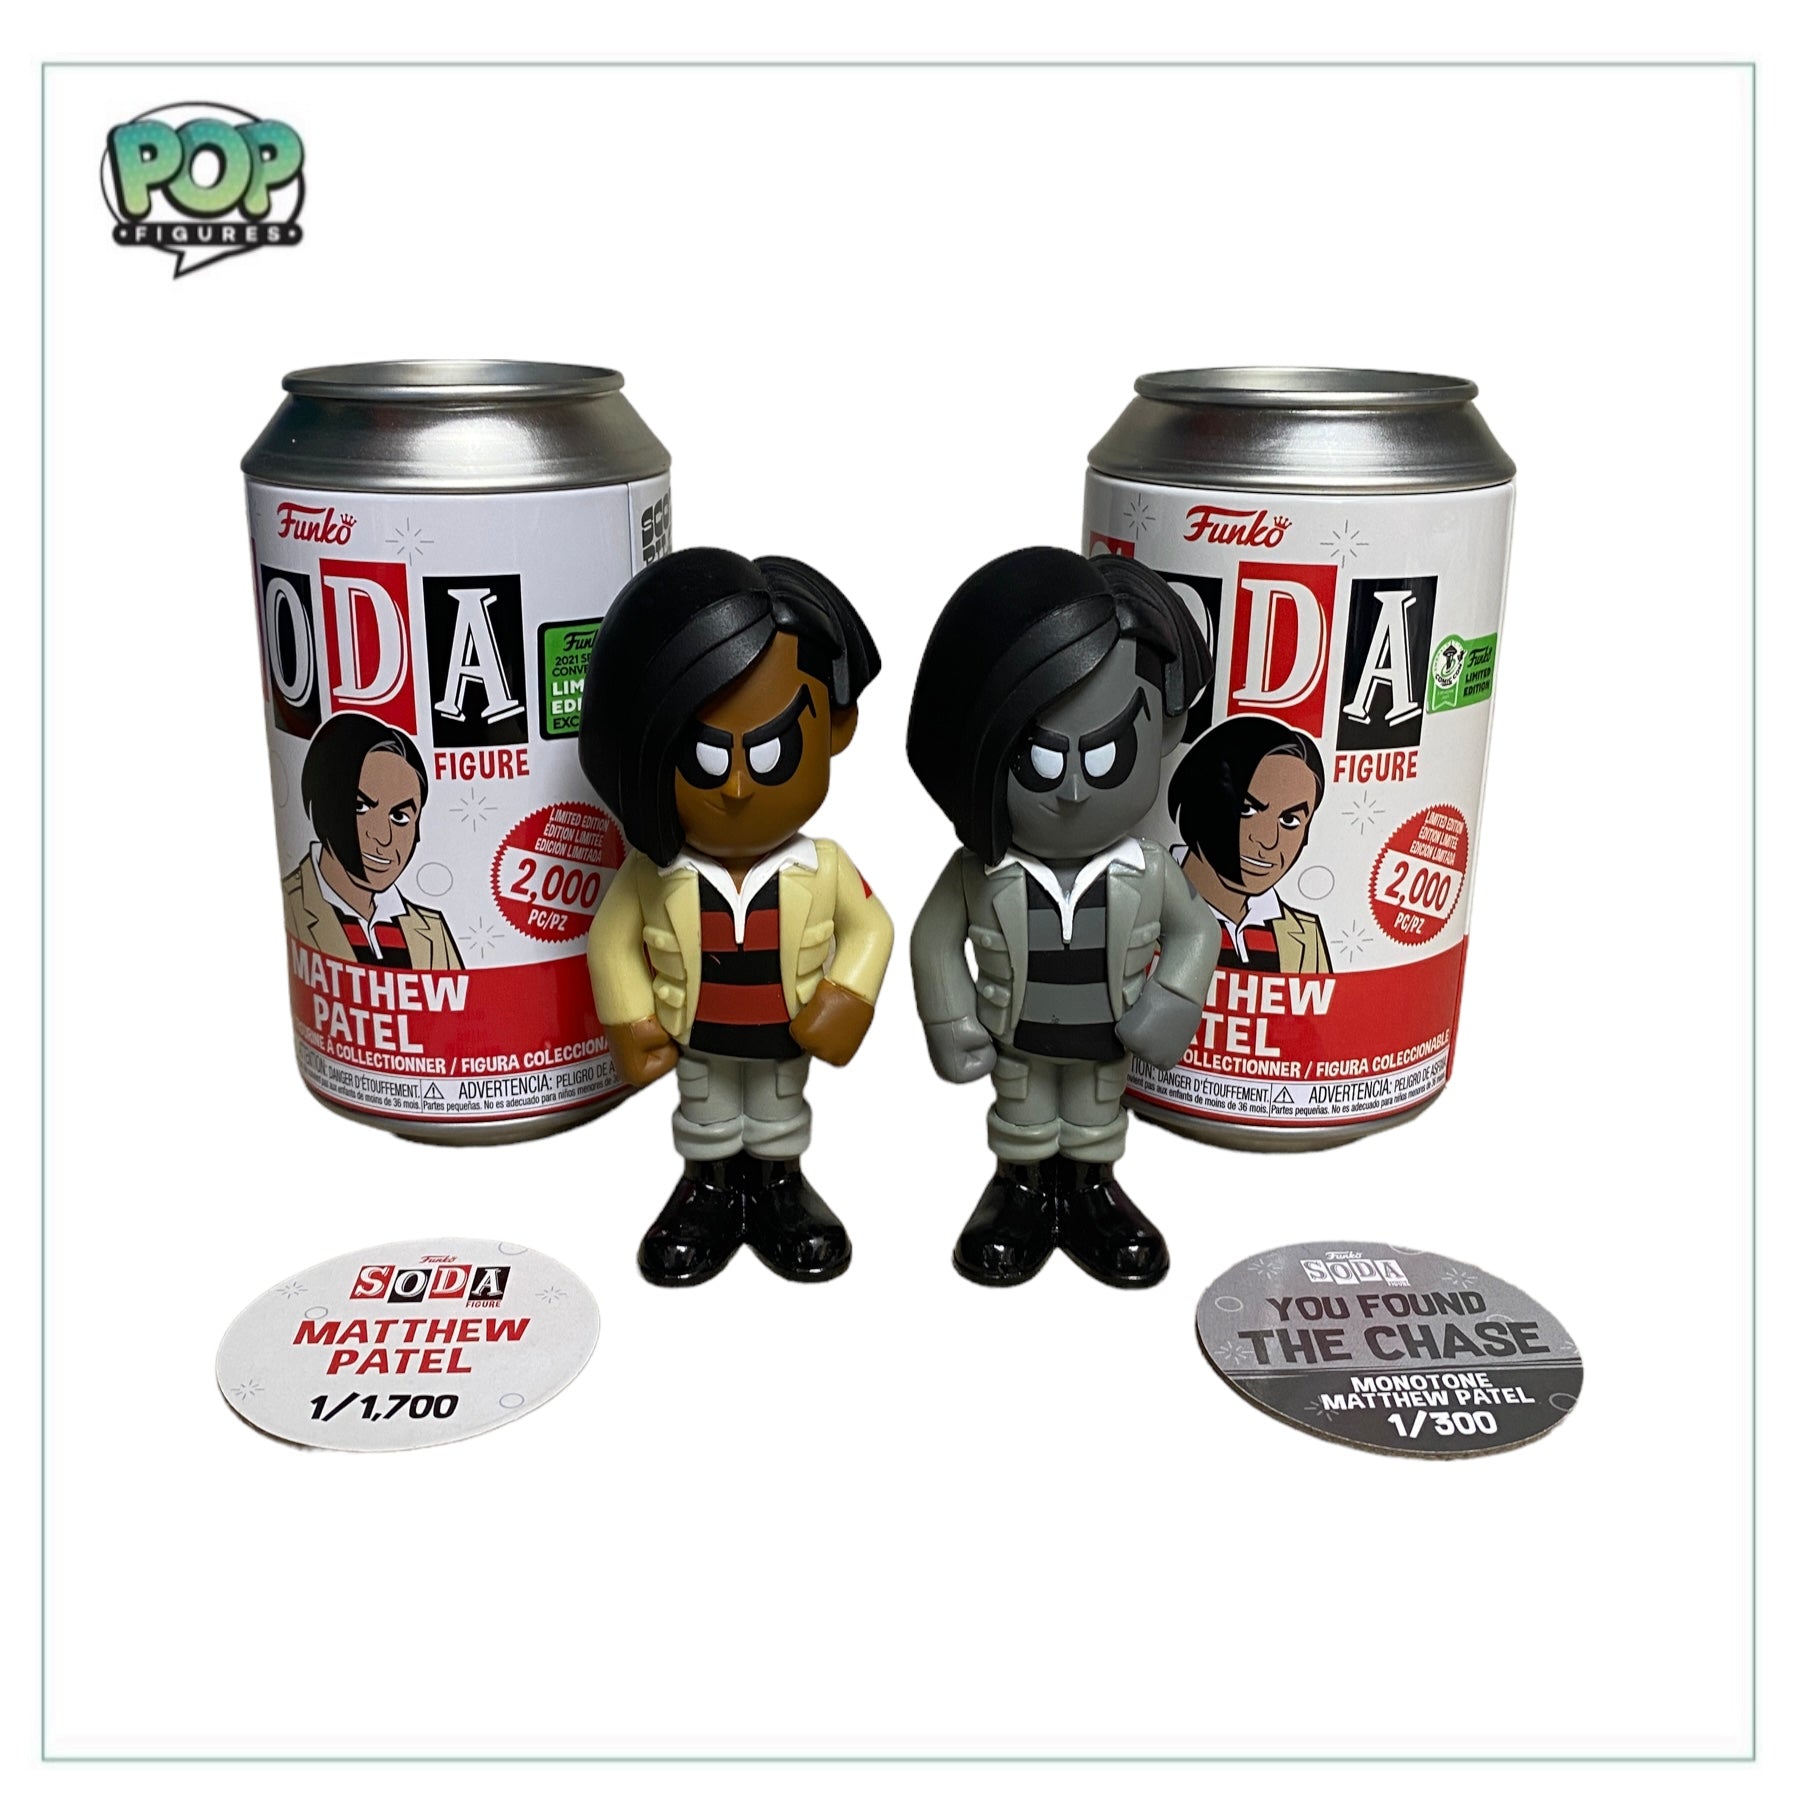 Matthew Patel Common & Black And White Chase Funko Soda Vinyl Figure Pair! - ECCC 2021 Official & Shared Convention Exclusive LE1/1700 & LE1/300